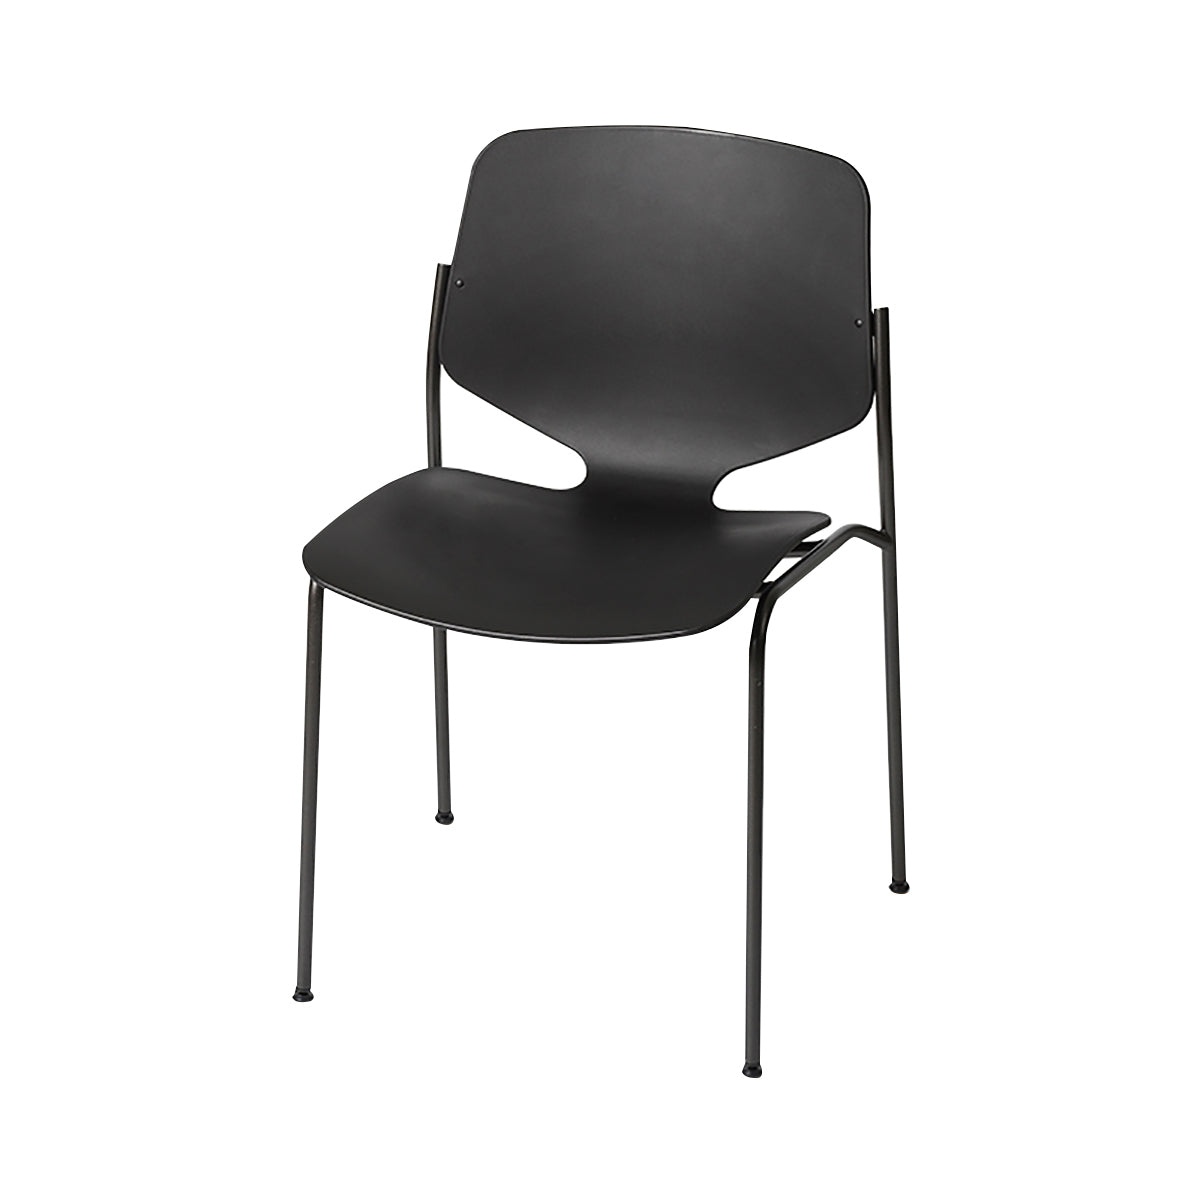 Nova Sea Side Chair: Without Upholstered Seat